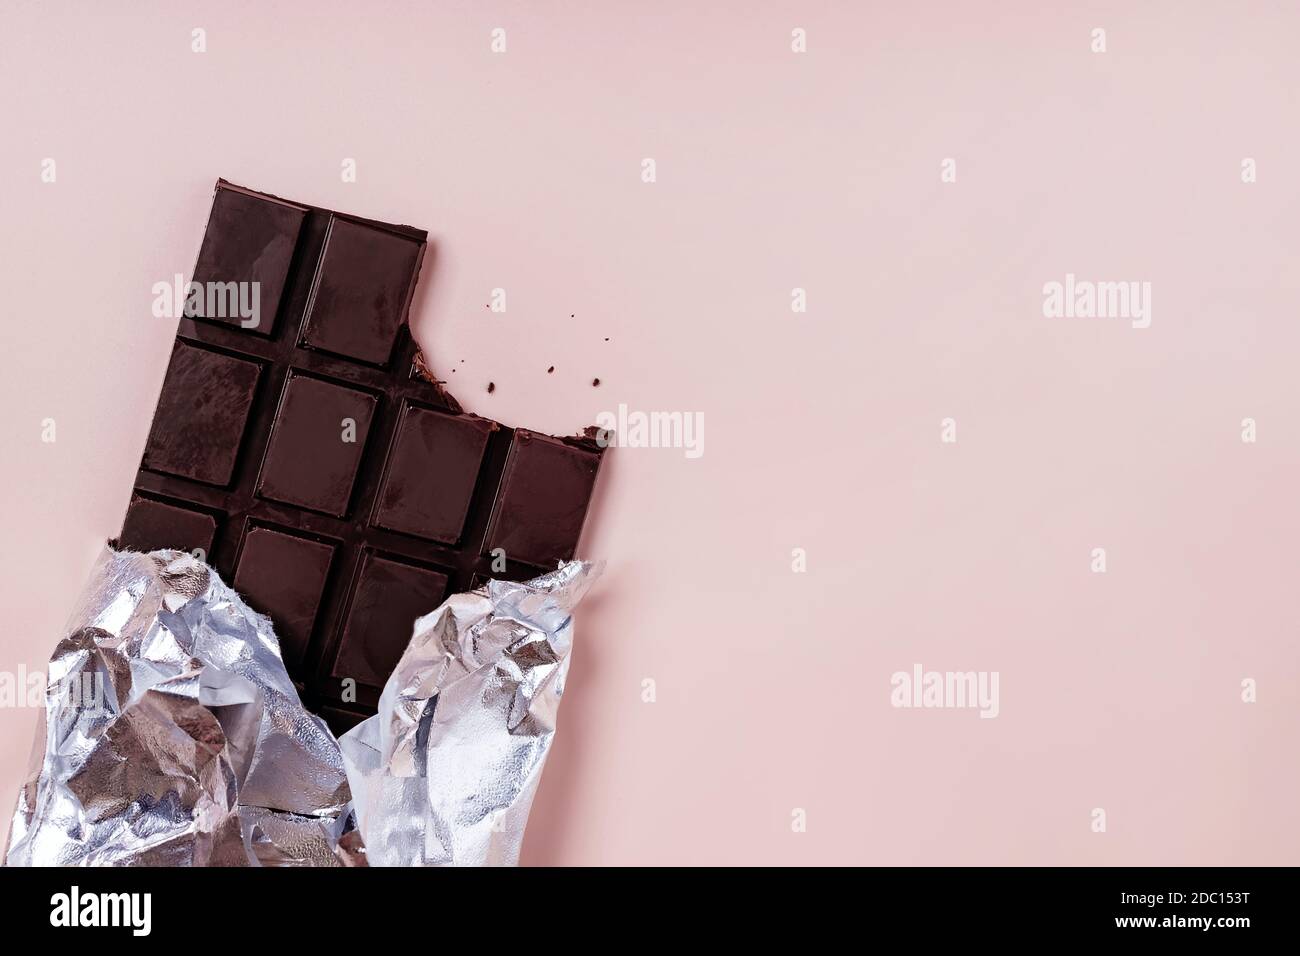 Bited bar of chocolate in foil with crumbs Stock Photo